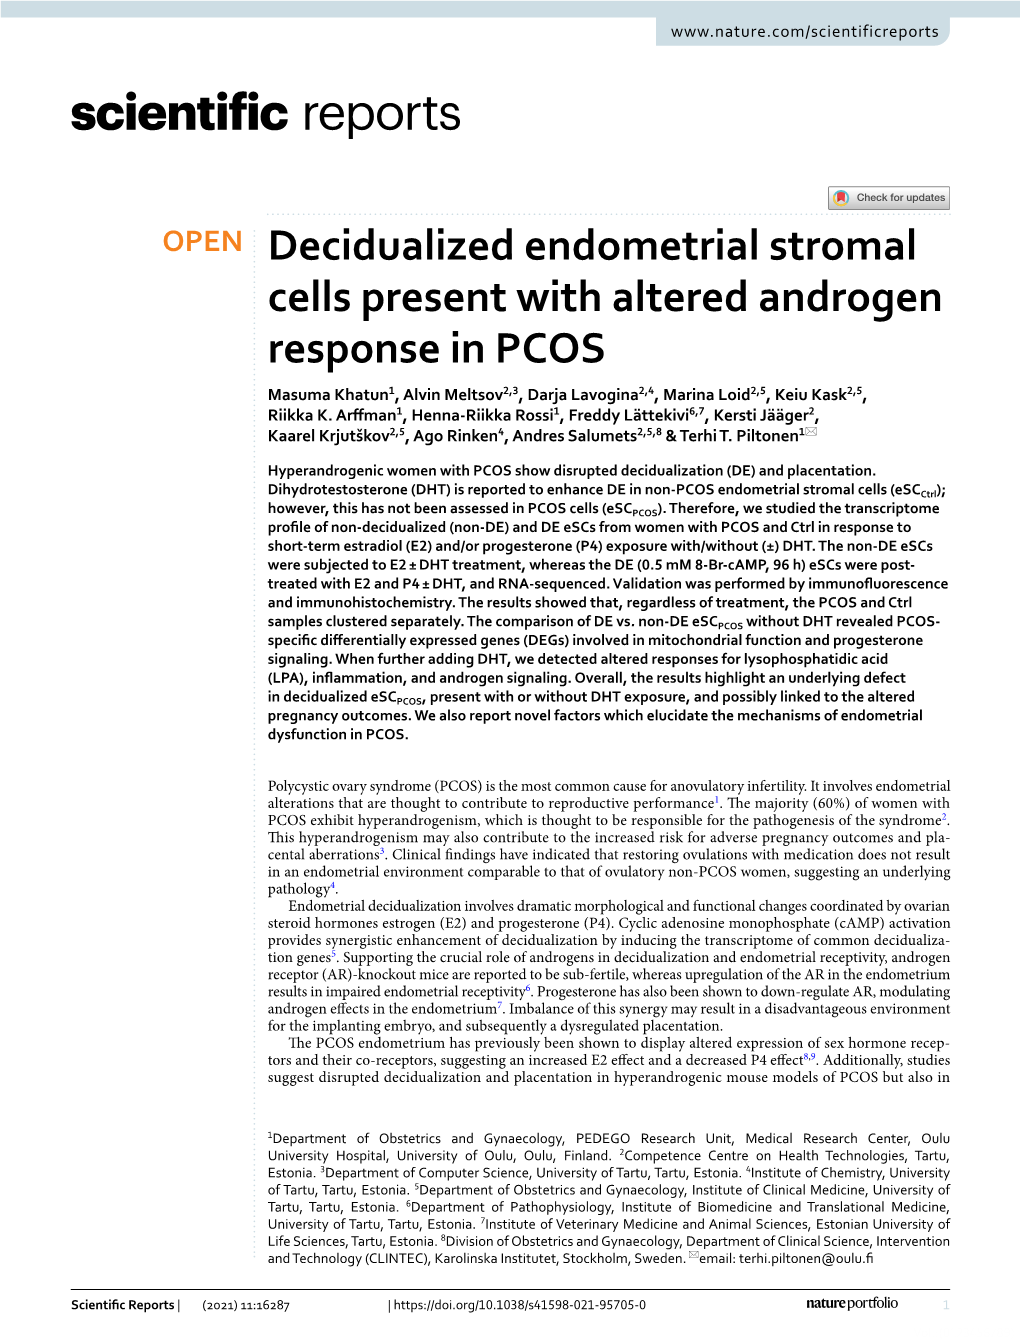 Decidualized Endometrial Stromal Cells Present with Altered Androgen Response in PCOS